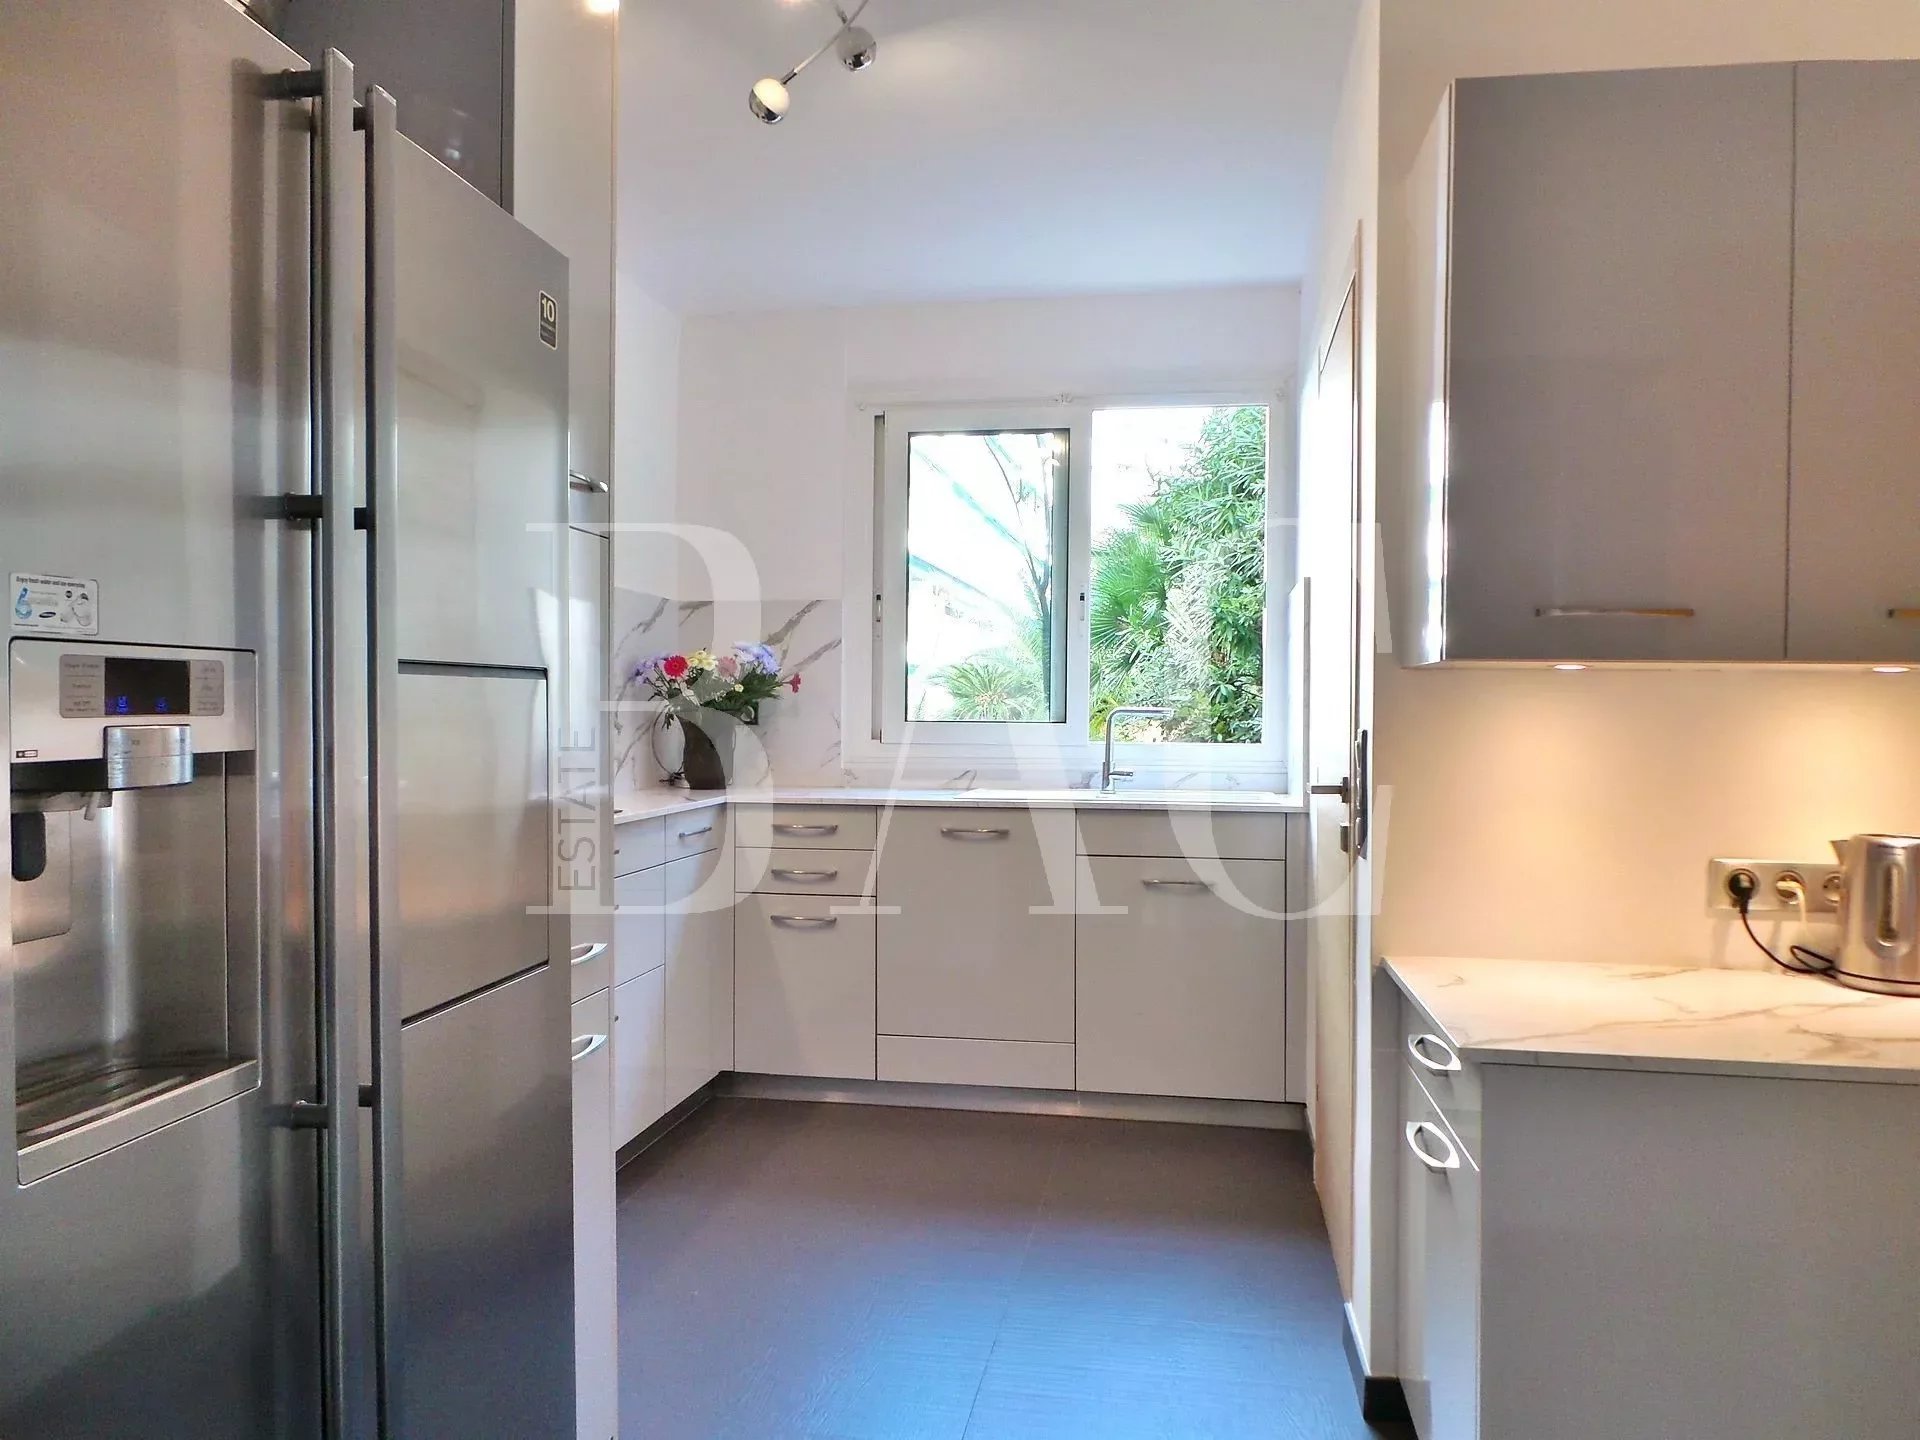 Cannes, superb apartment 150 meters from the famous Forville market